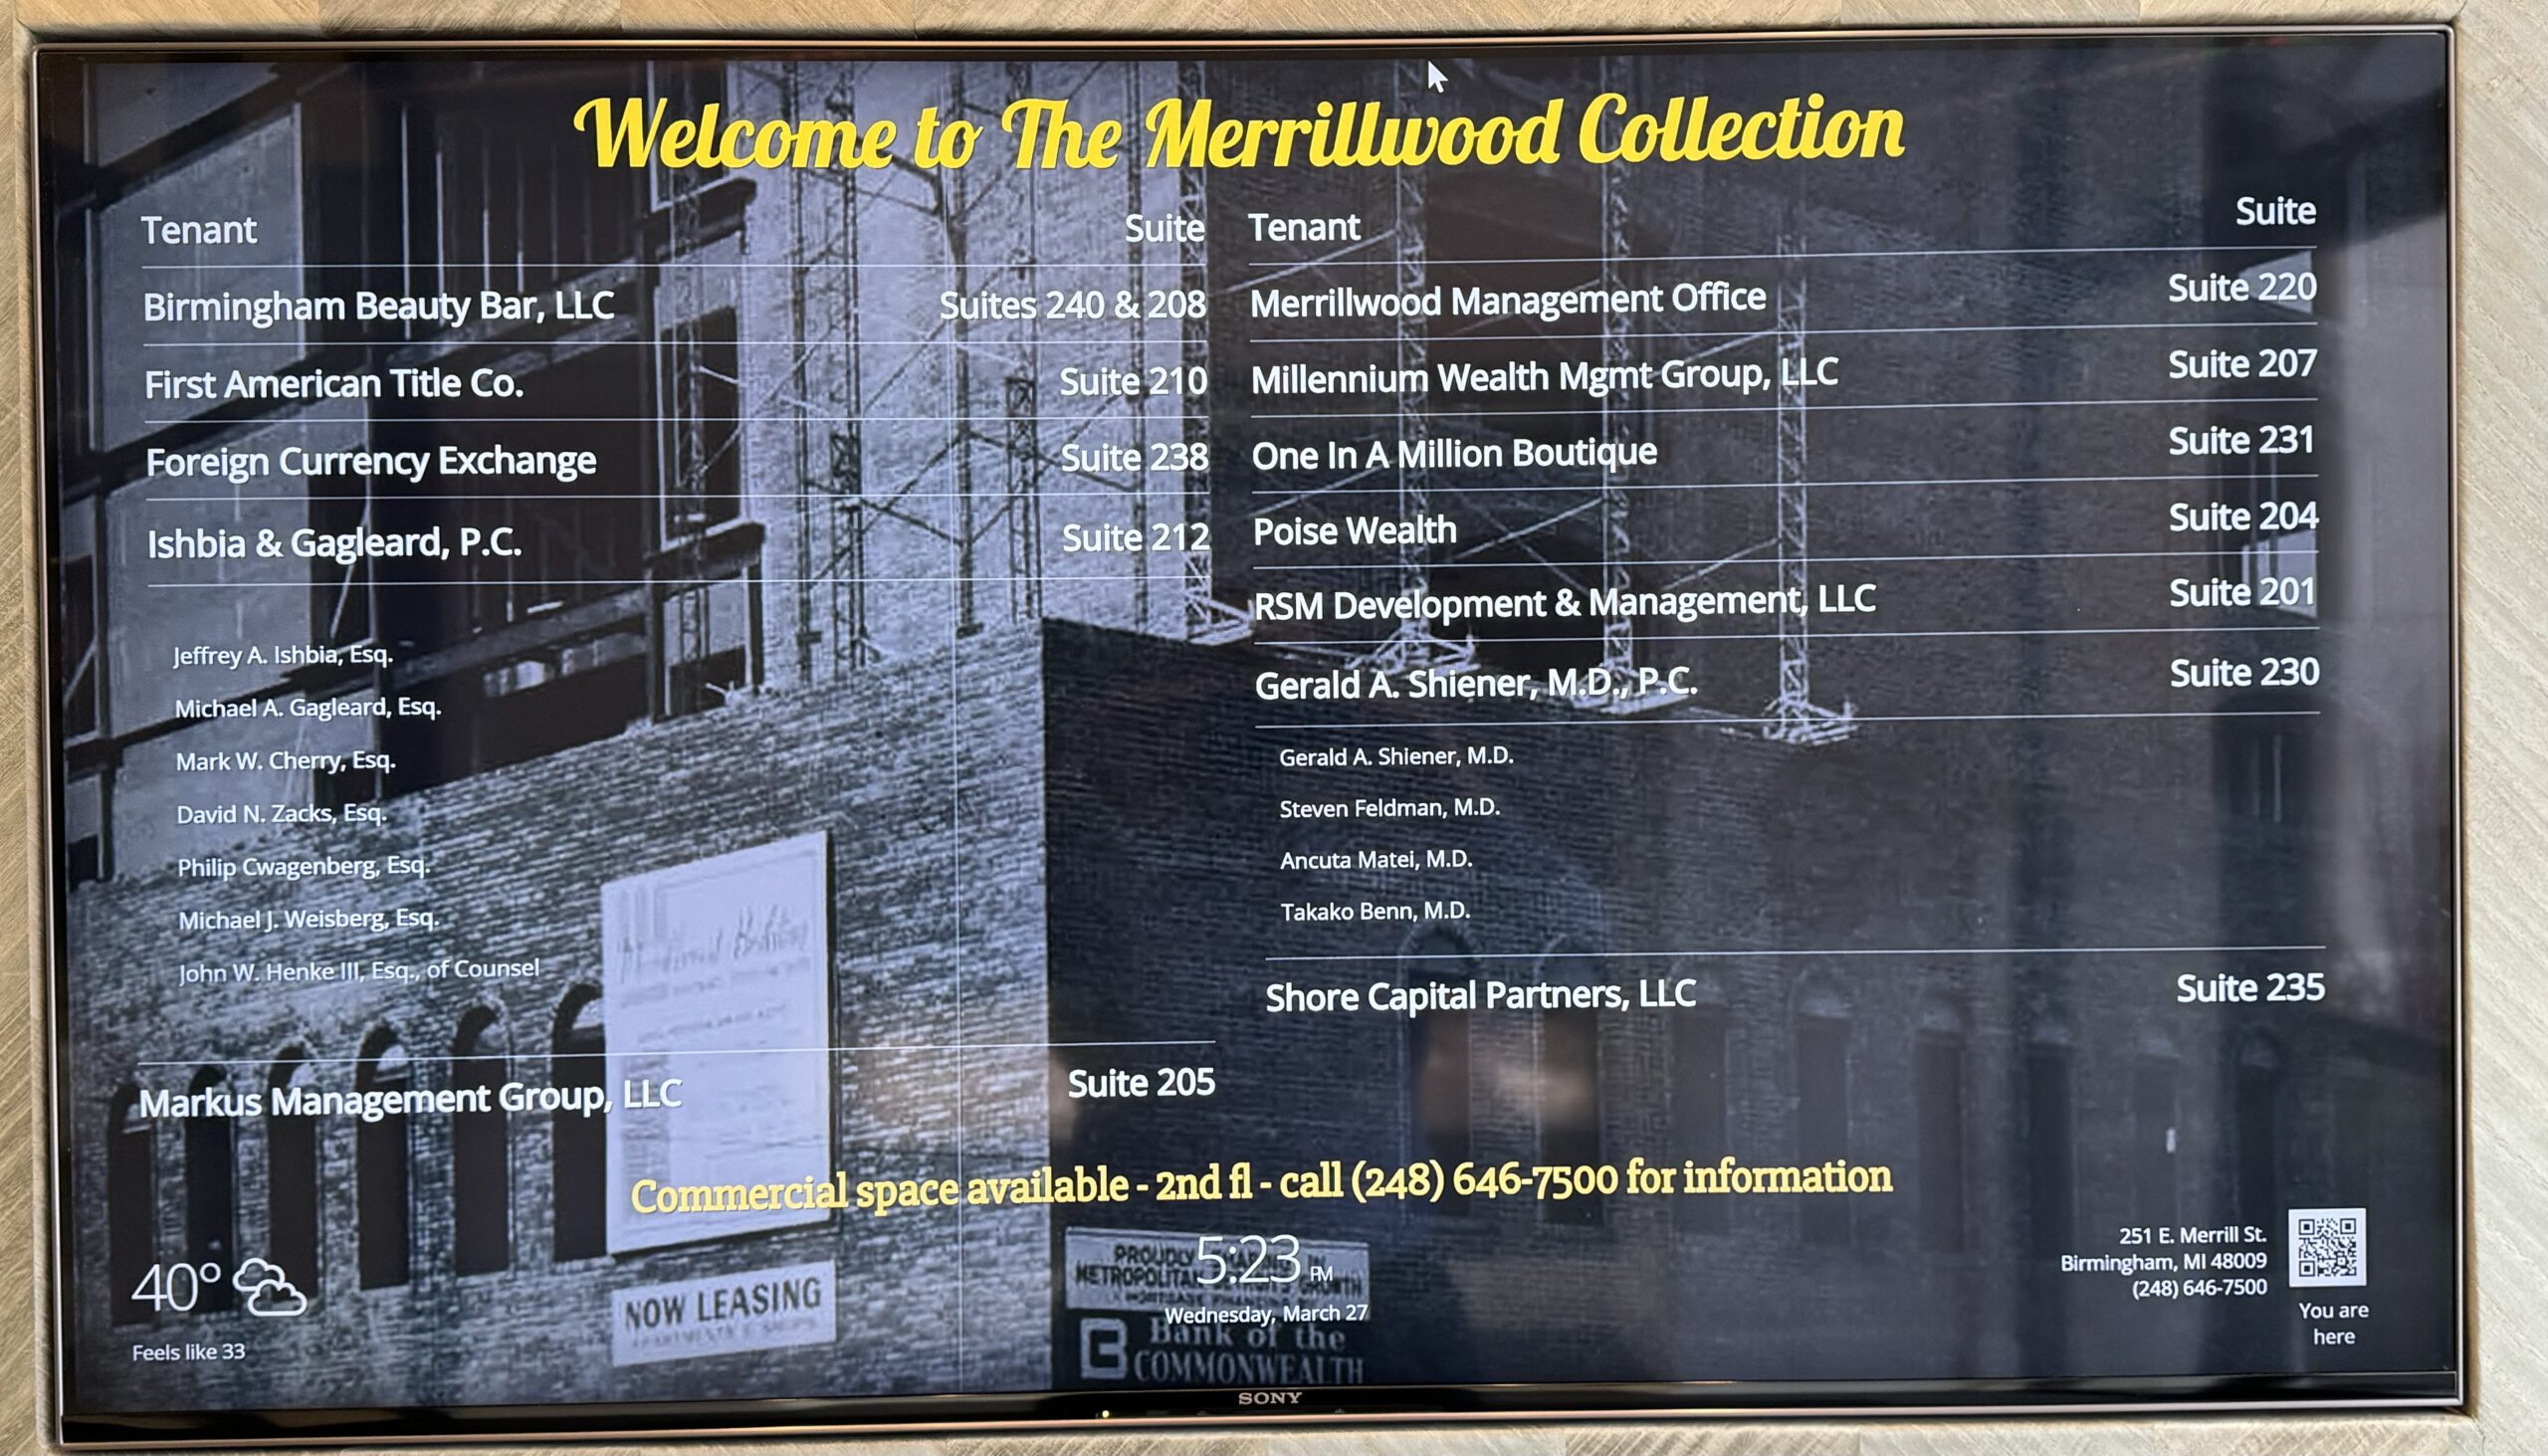 The Merrillwood Collection